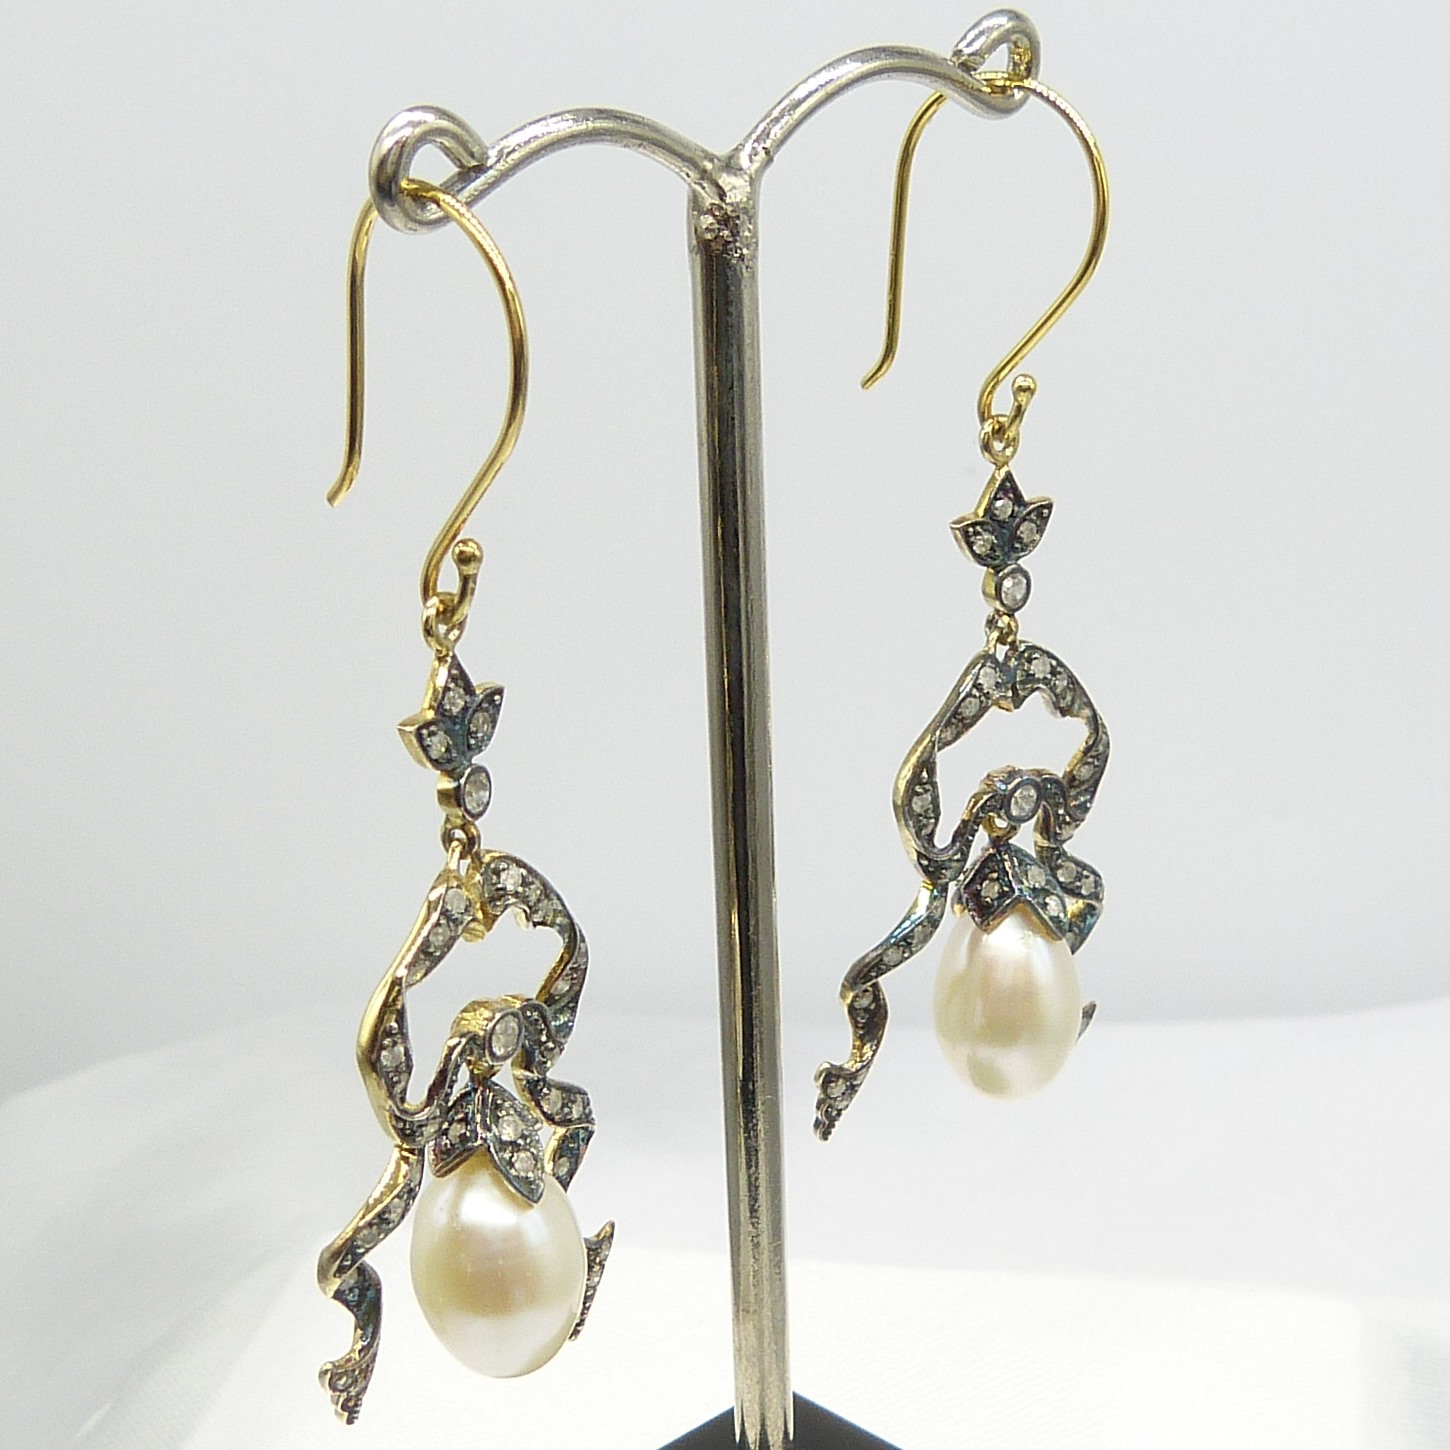 A pair of long drop ribbon-style earrings set with cultured pearls and Diamonds - Image 7 of 7